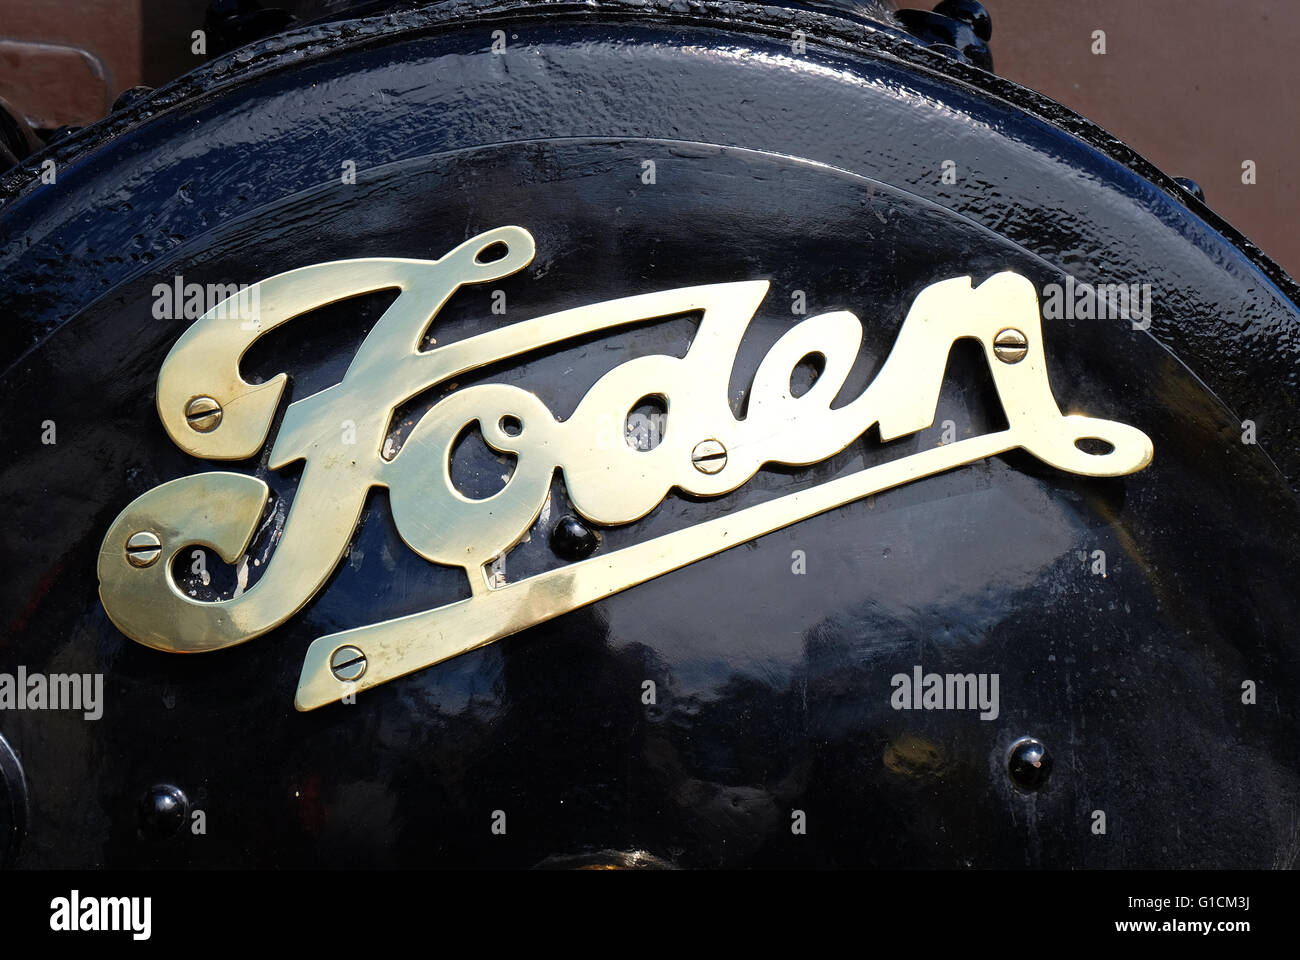 Foden truck and bus company logo Stock Photo